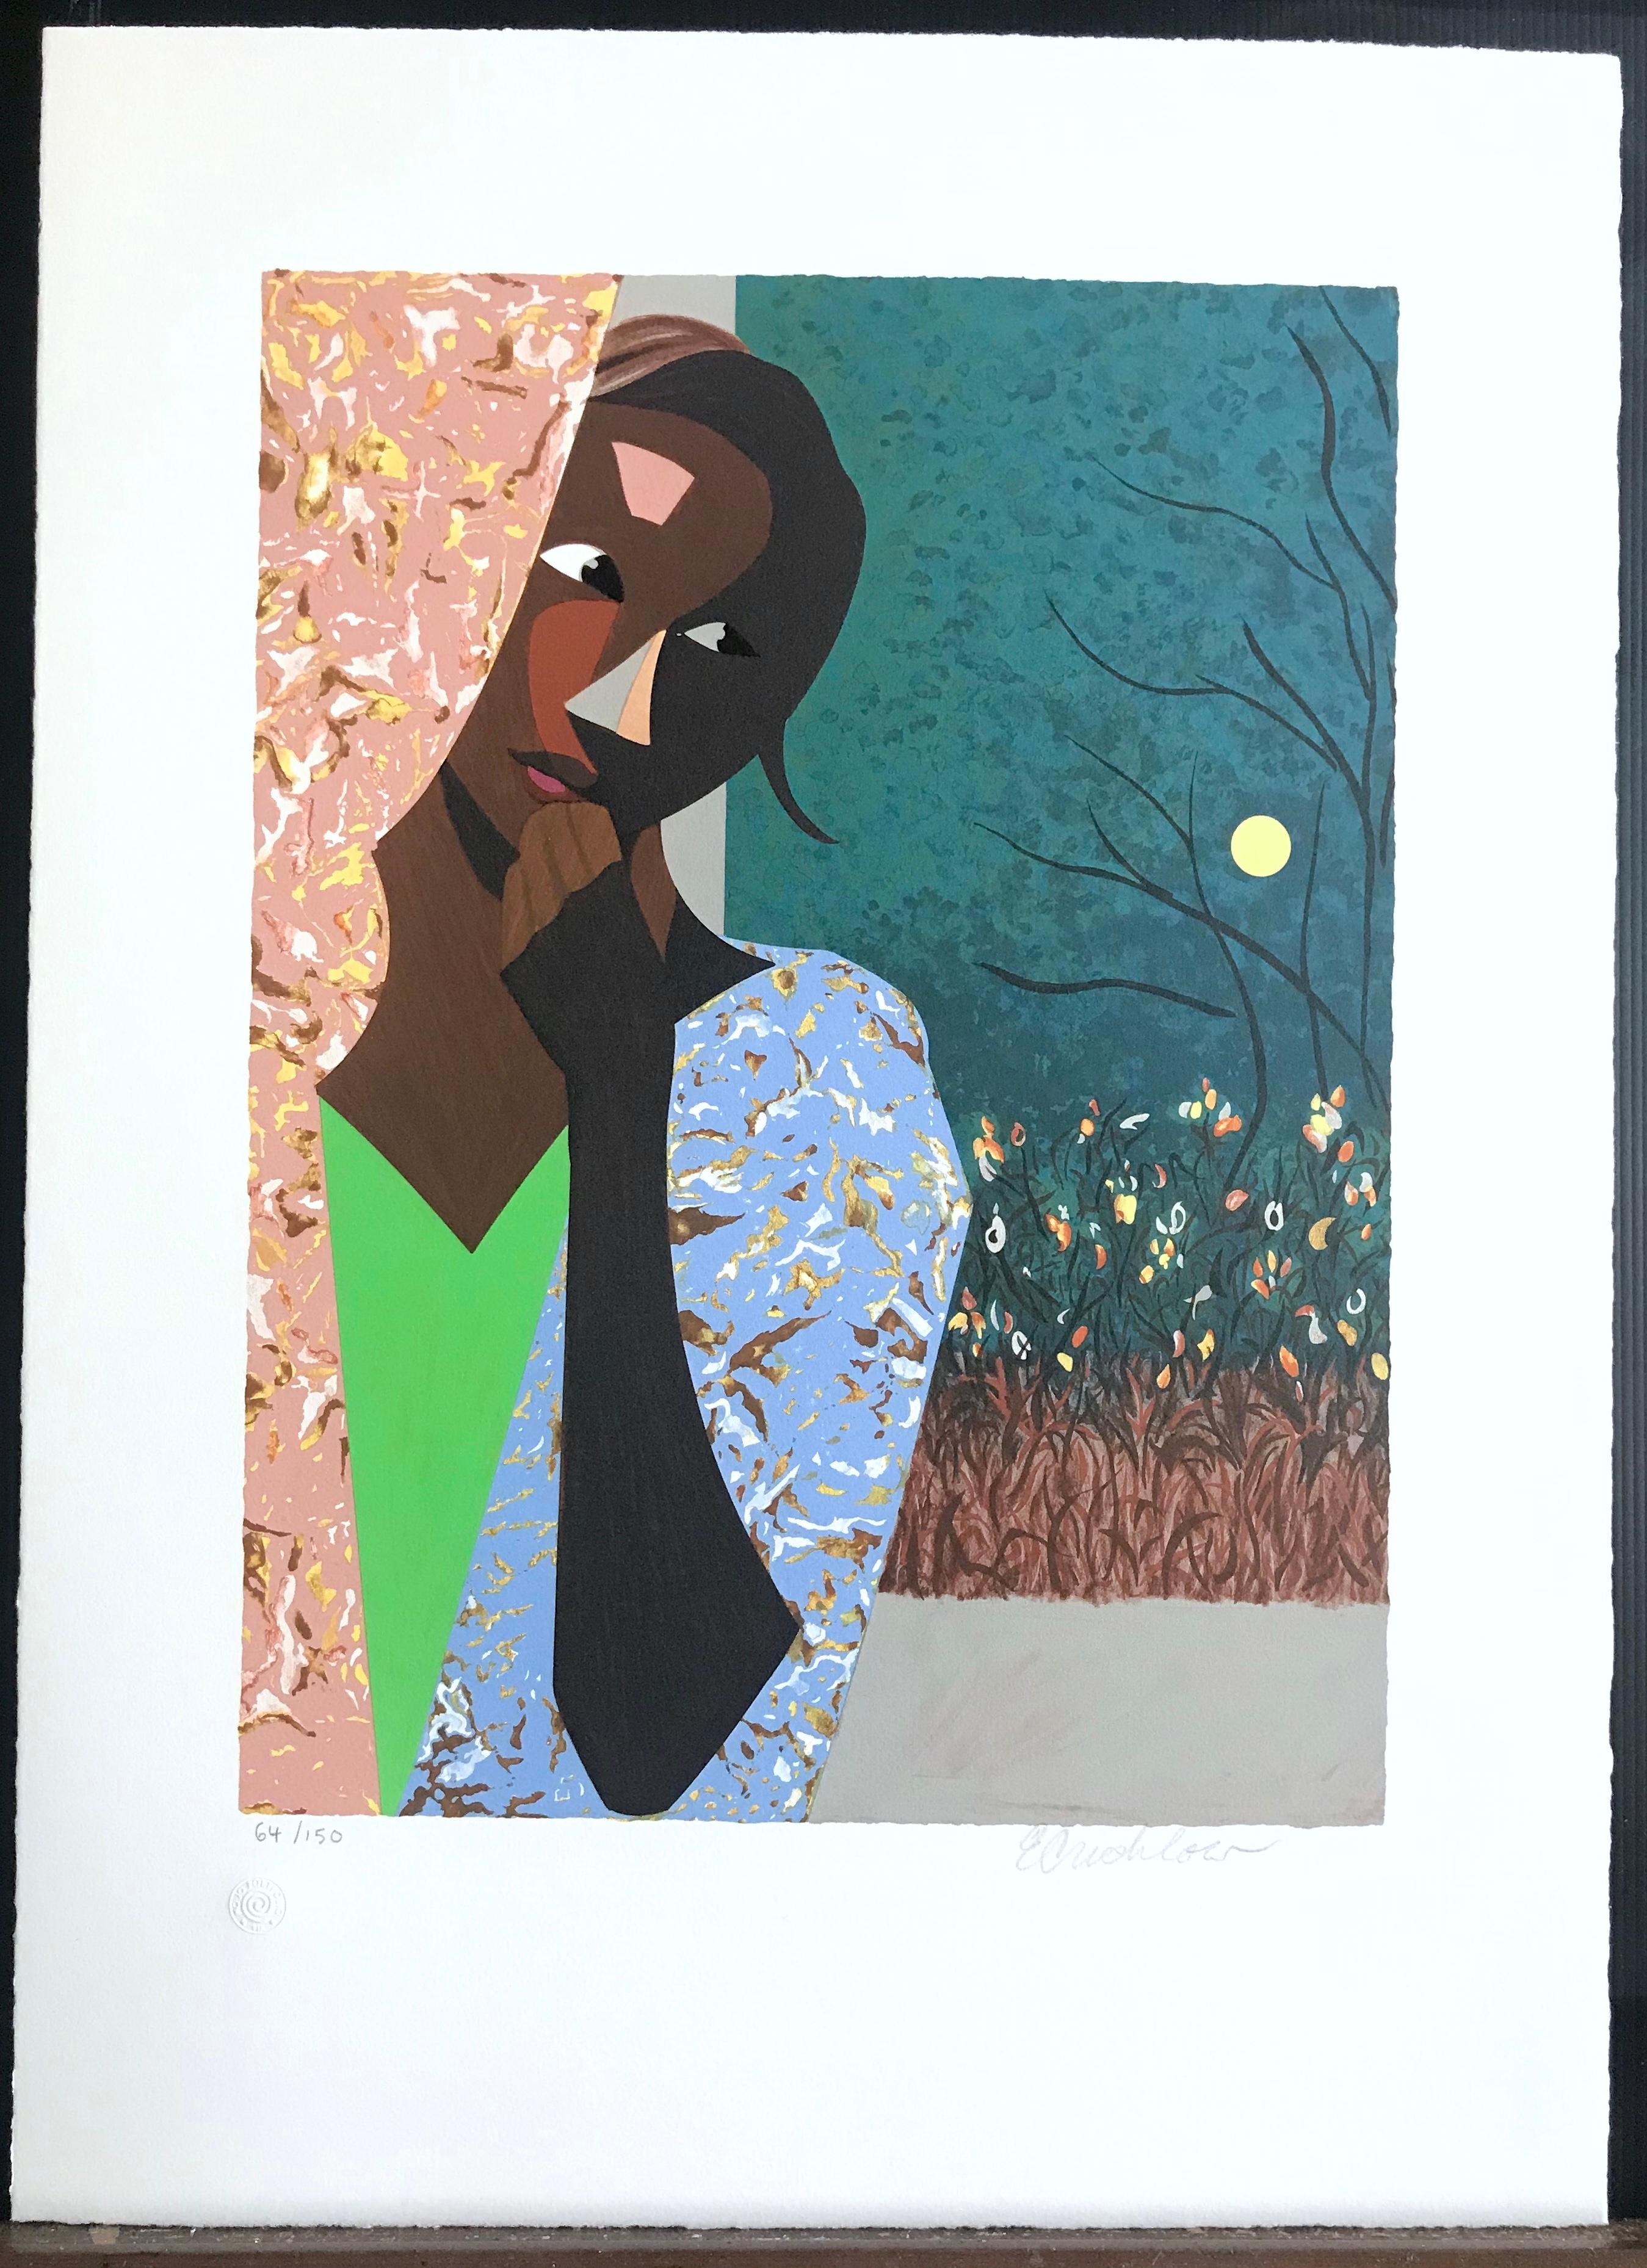 EVENING THOUGHTS is an original limited edition lithograph by the Harlem Renaissance, social realist African-American artist ERNEST CRICHLOW (1914-2005). Printed in 2002 at JK Fine Art editions Co. from hand drawn plates using traditional hand